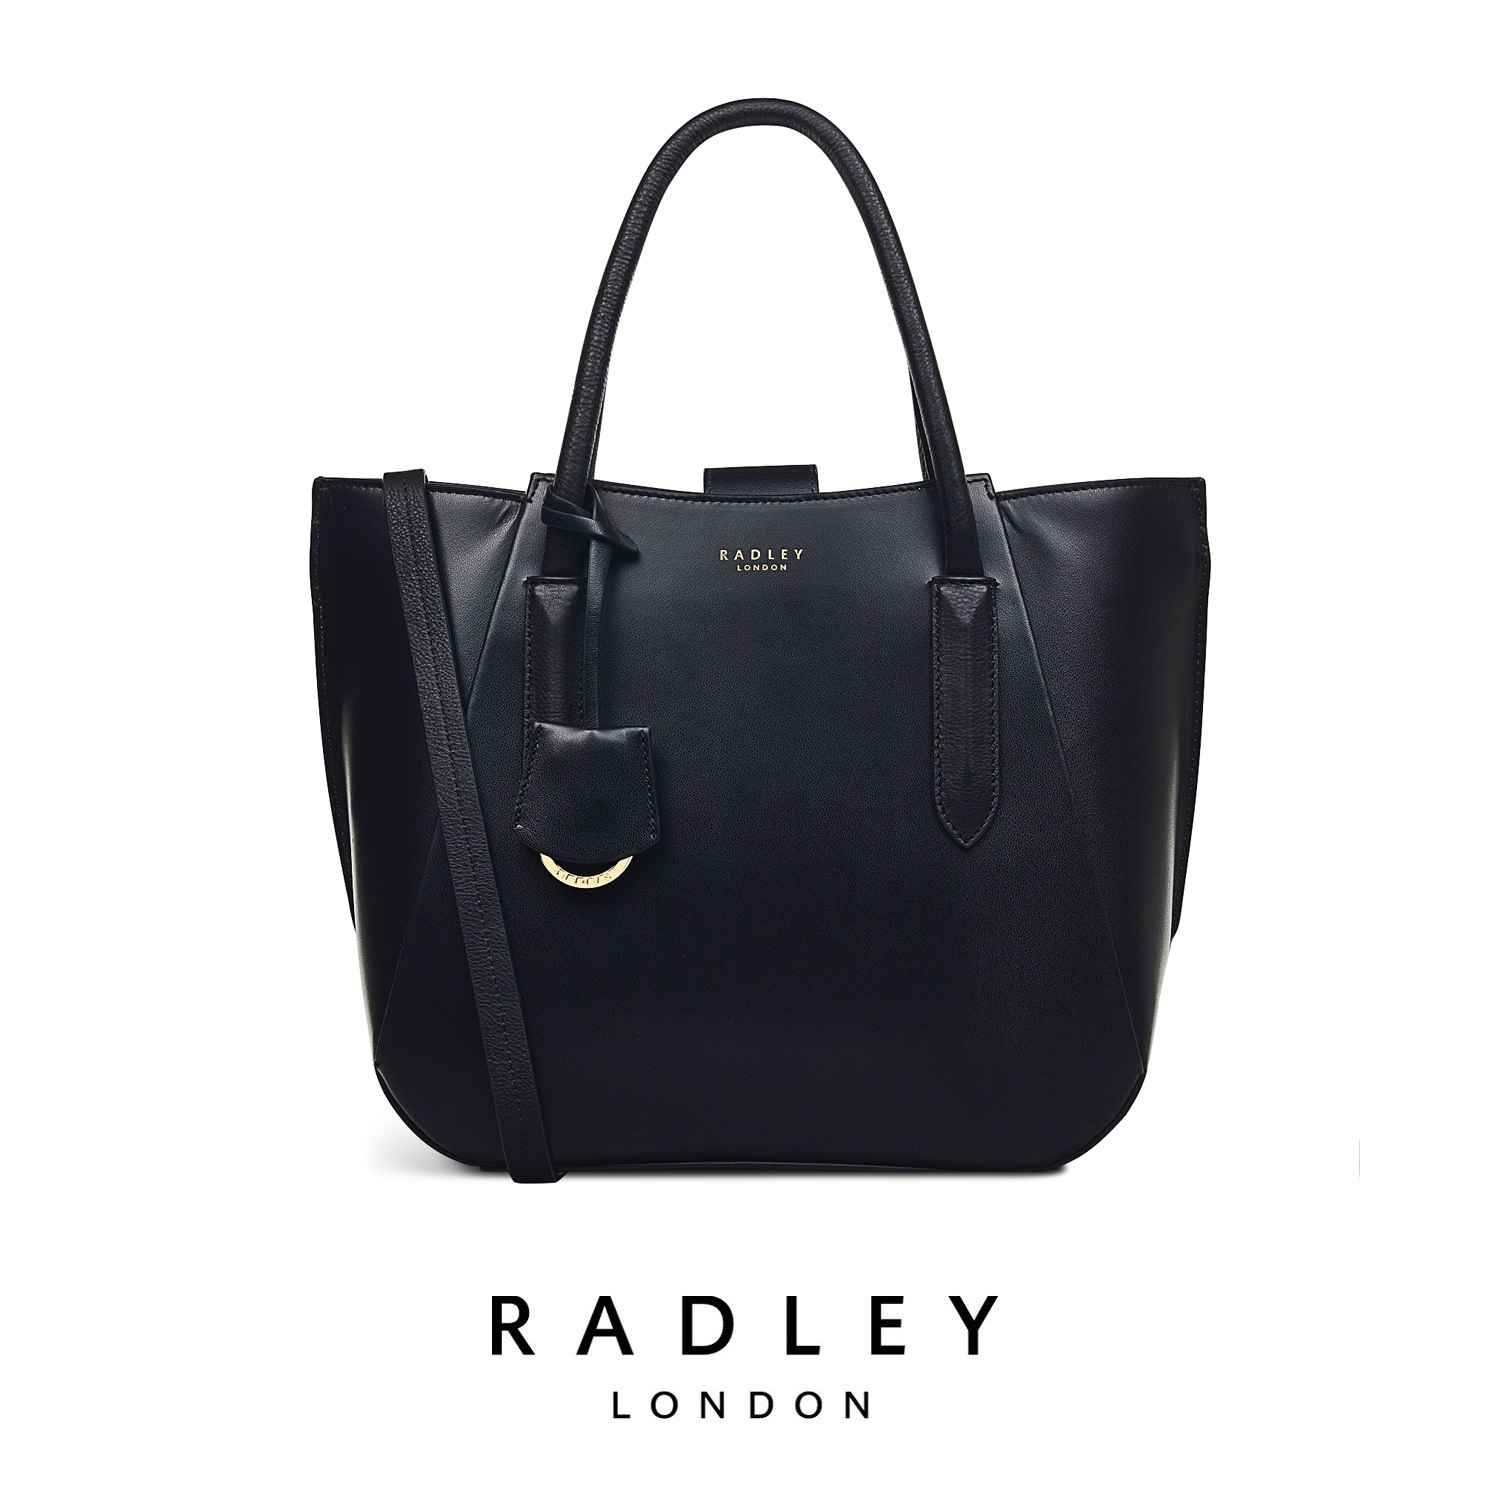 Radley London - 'Chin Wag' - our NEW Notting Hill inspired... | Facebook